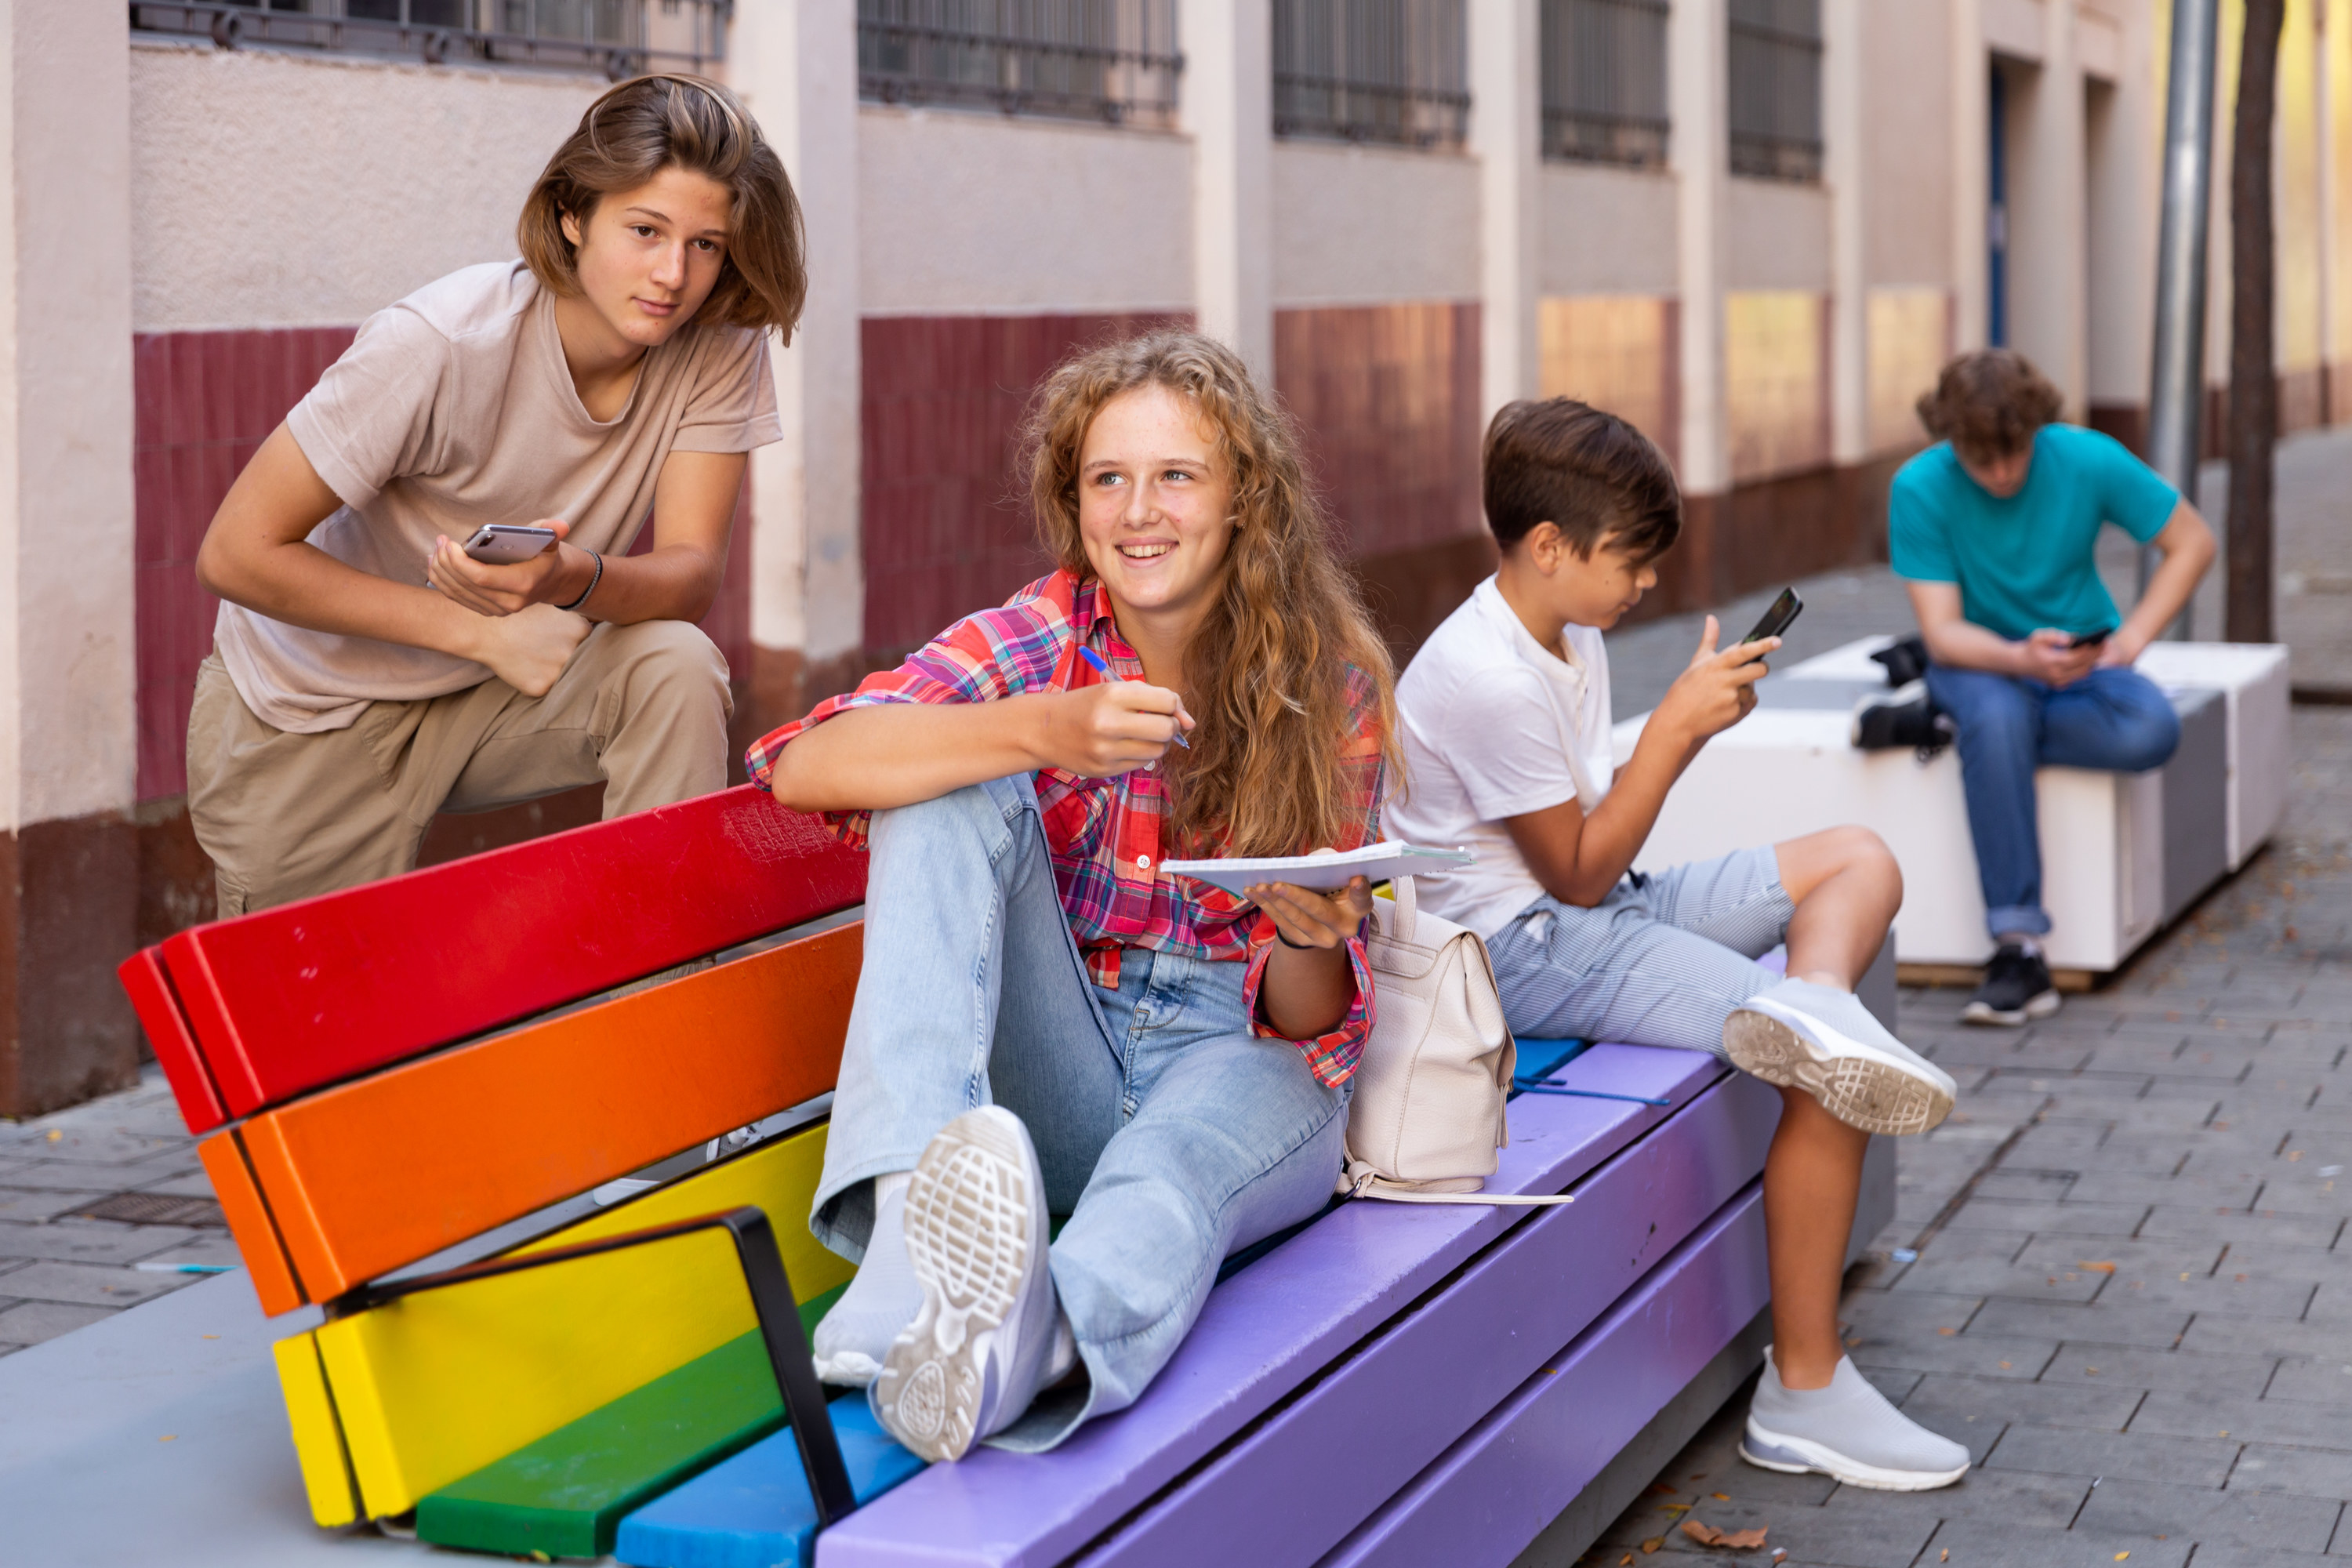 Three kids siting on a rainbow colored bench hanging out with each other